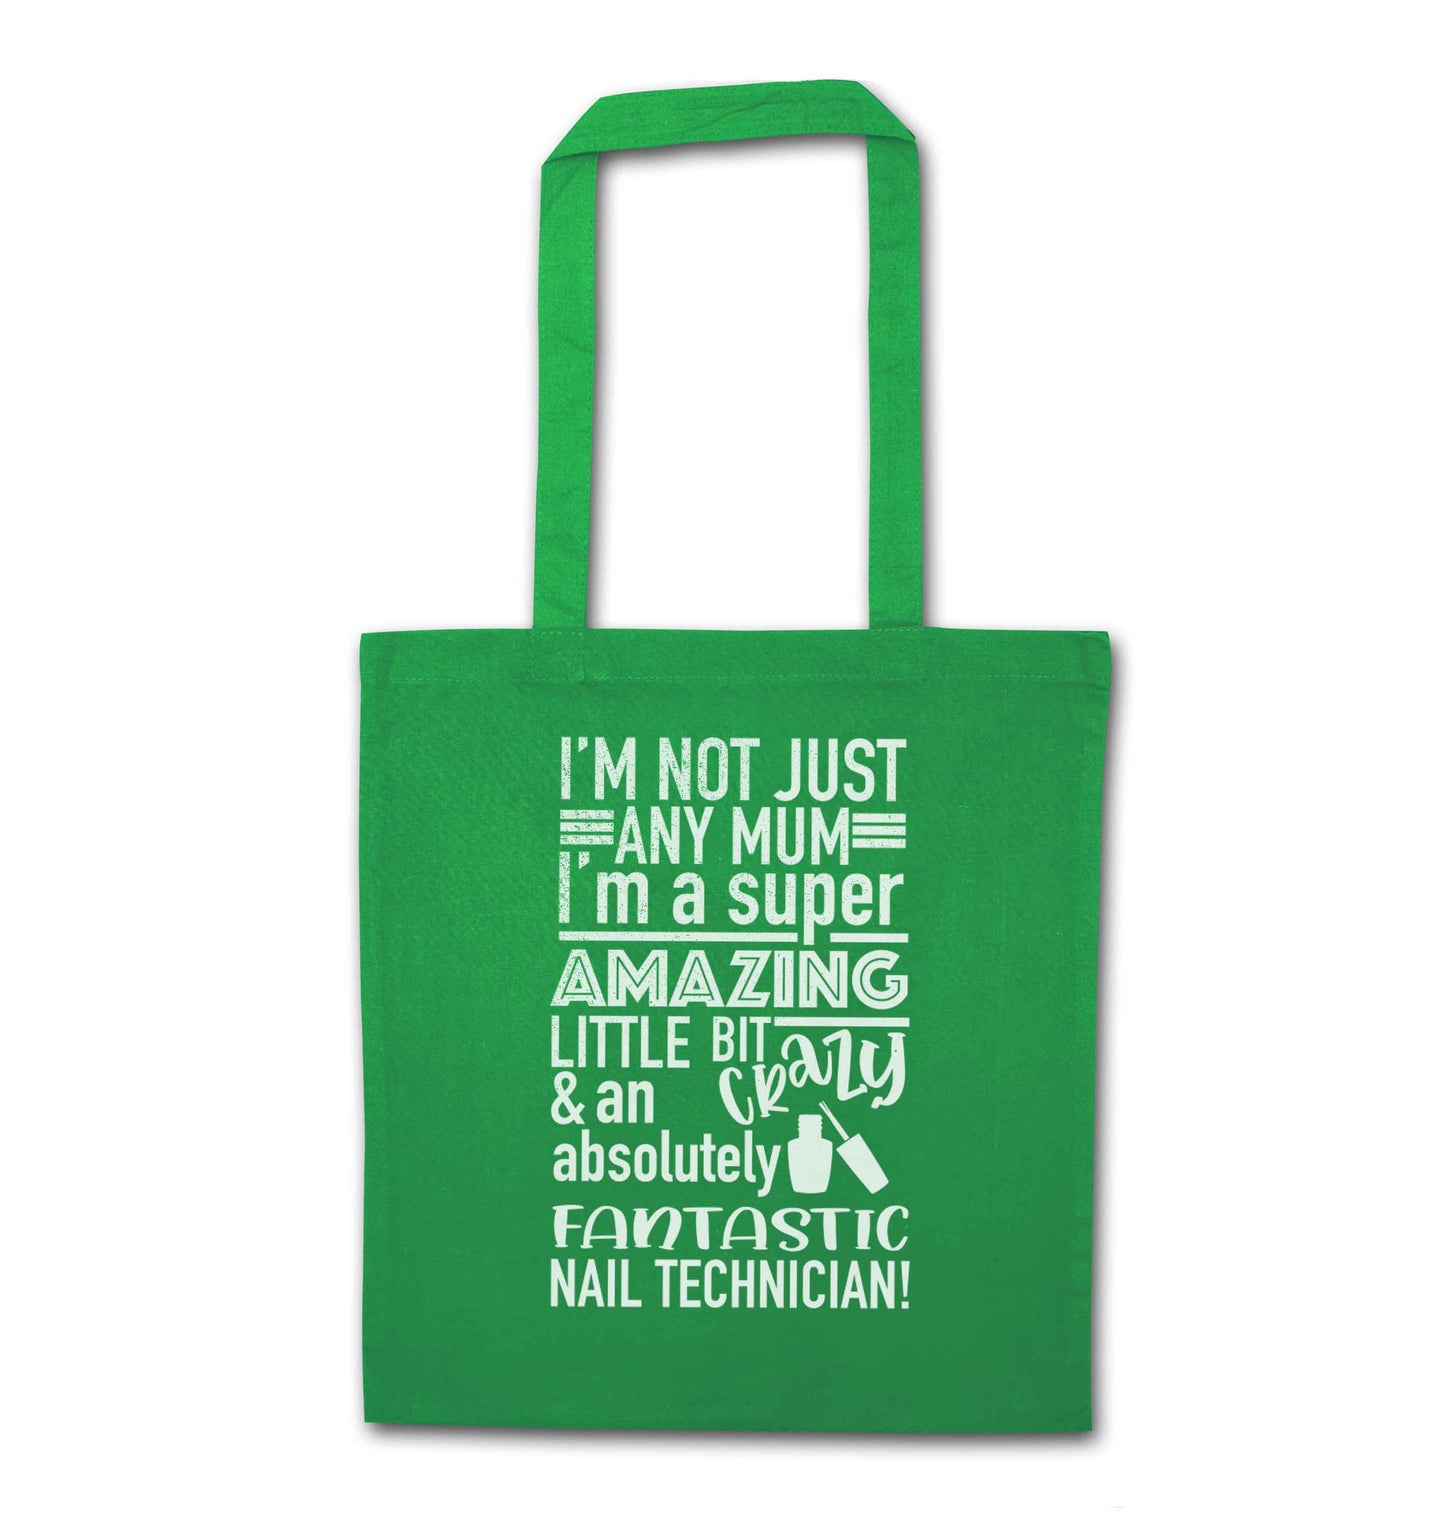 I'm not just any mum I'm a super amazing little bit crazy and an absolutely fantastic nail technician! green tote bag